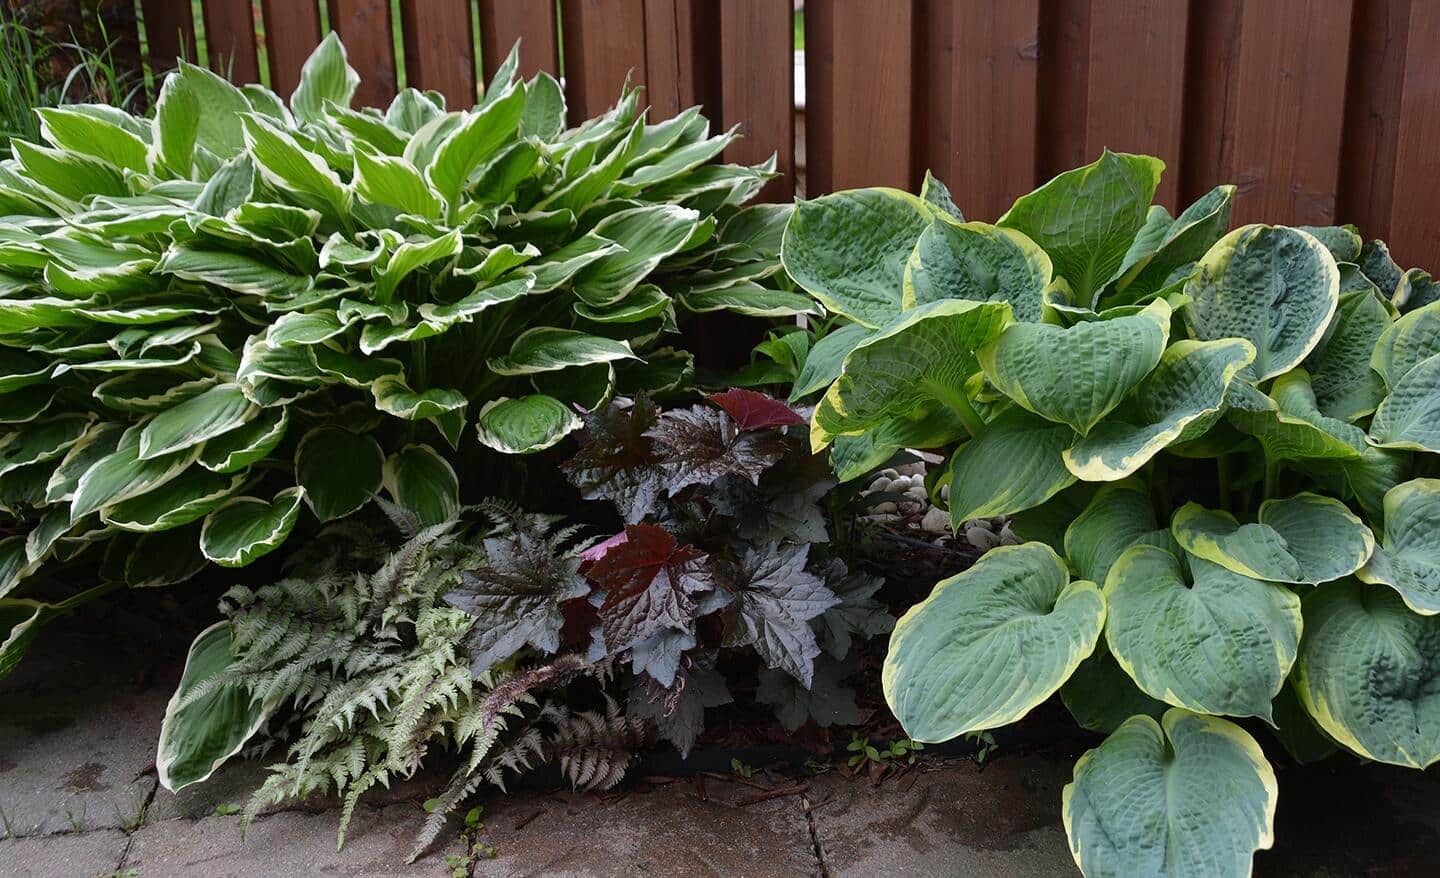 Hosta plants in a shade garden by a fence